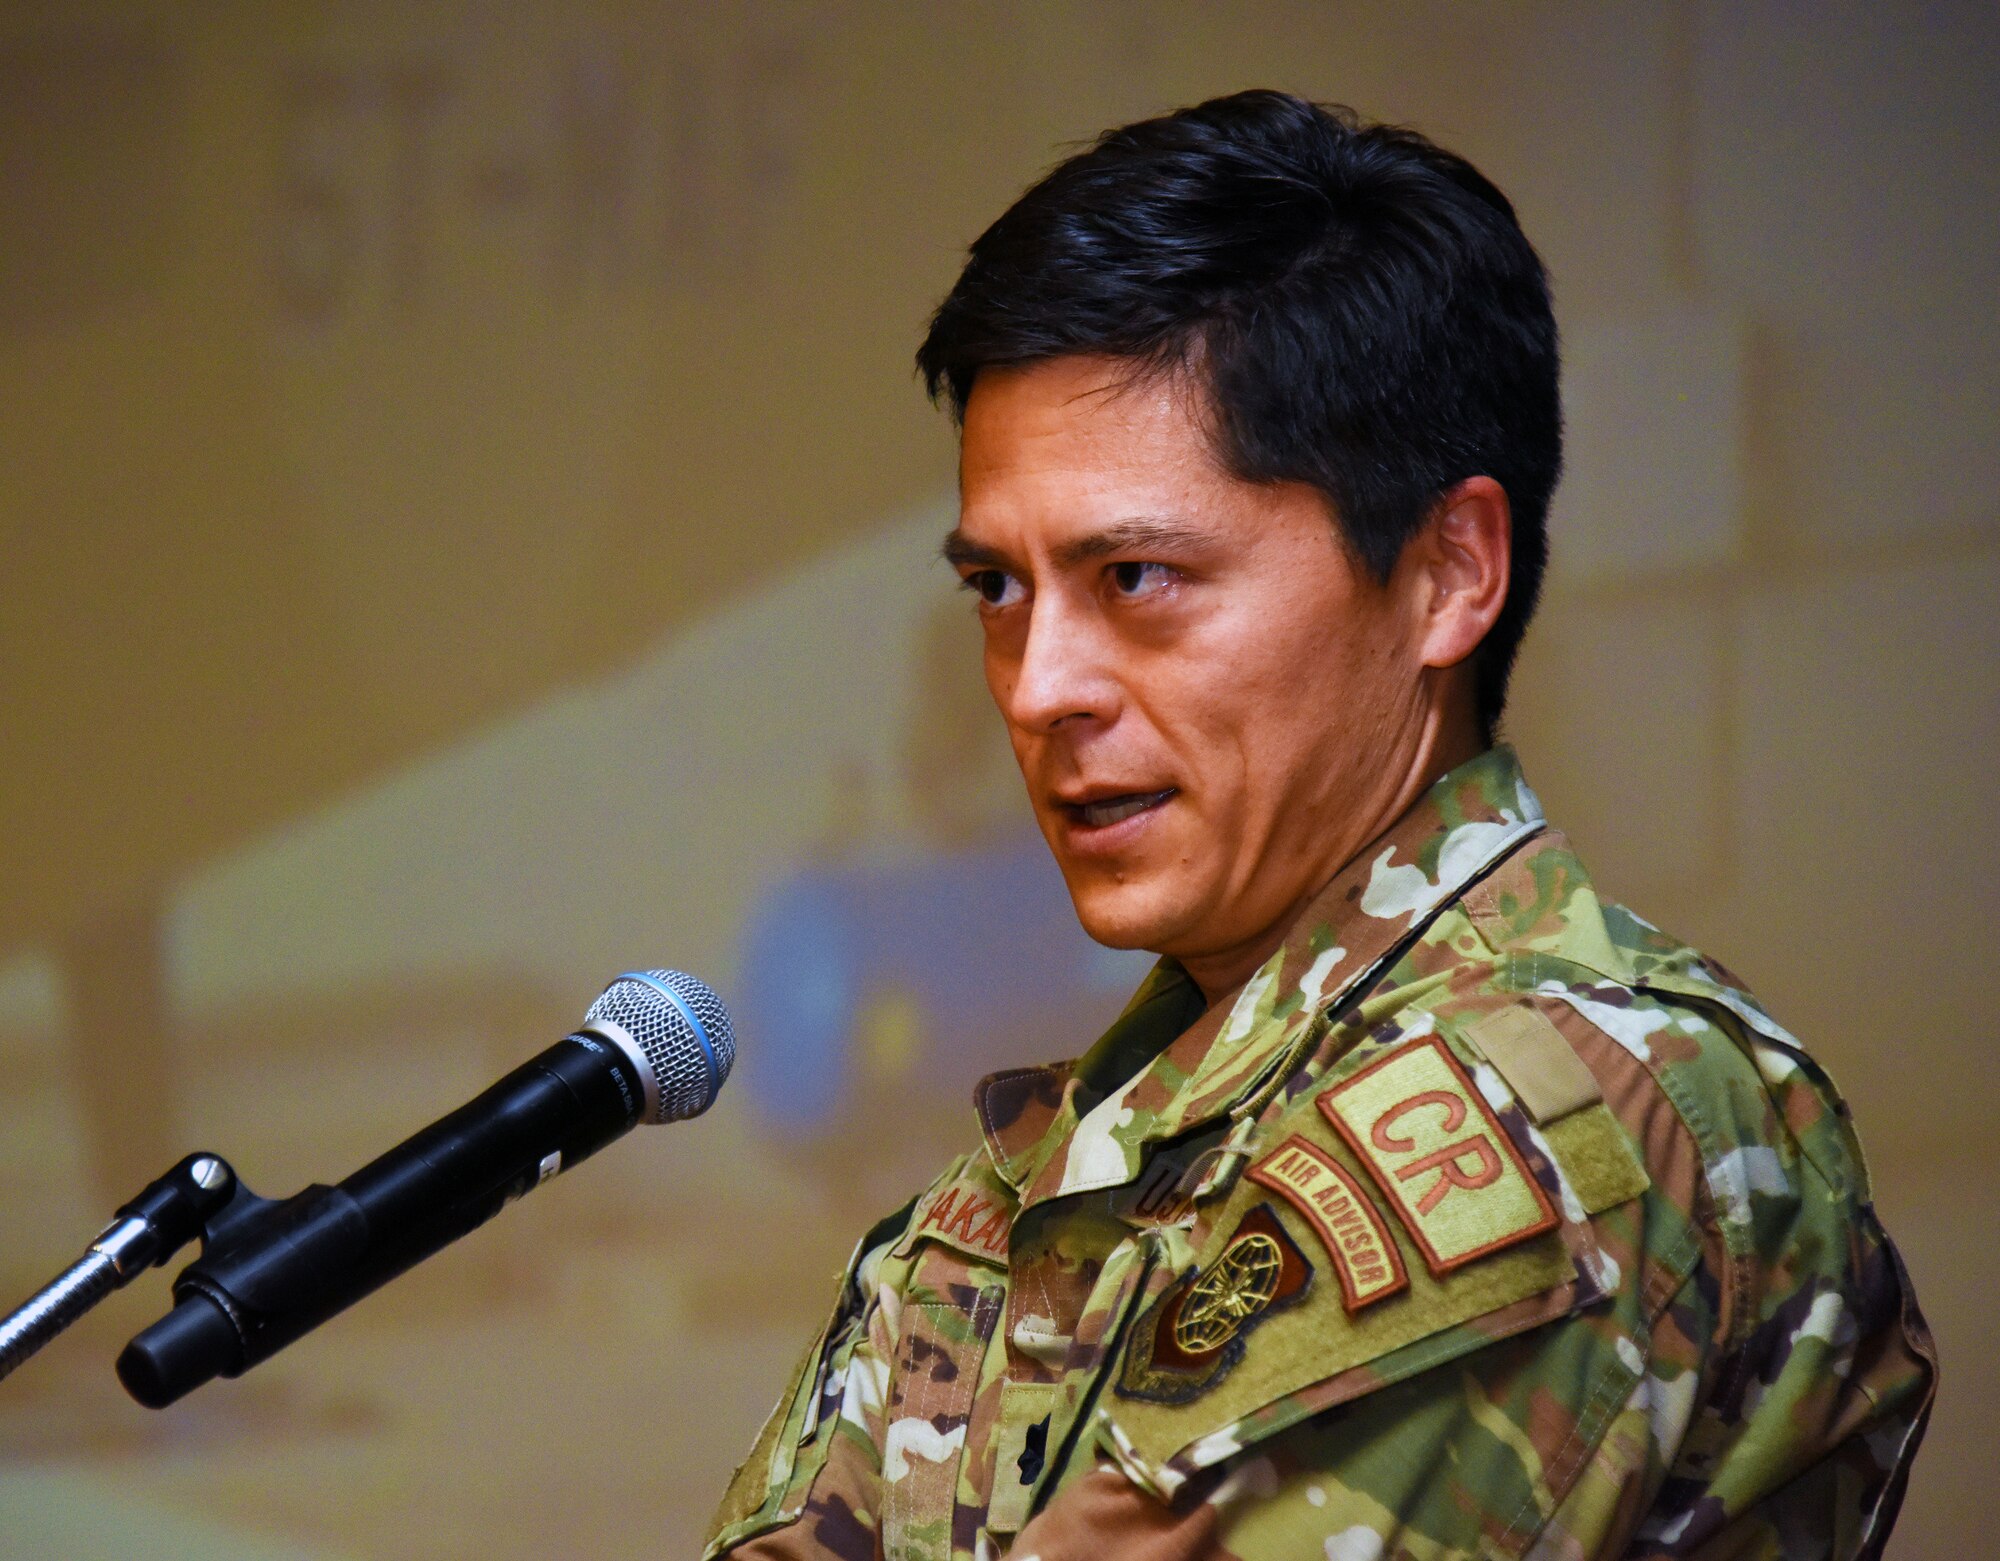 U.S. Air Force Lt. Col. Philemon Sakamoto, 818 Military Support Advisor Squadron Director of Operations, talks to Airmen at the symposium.